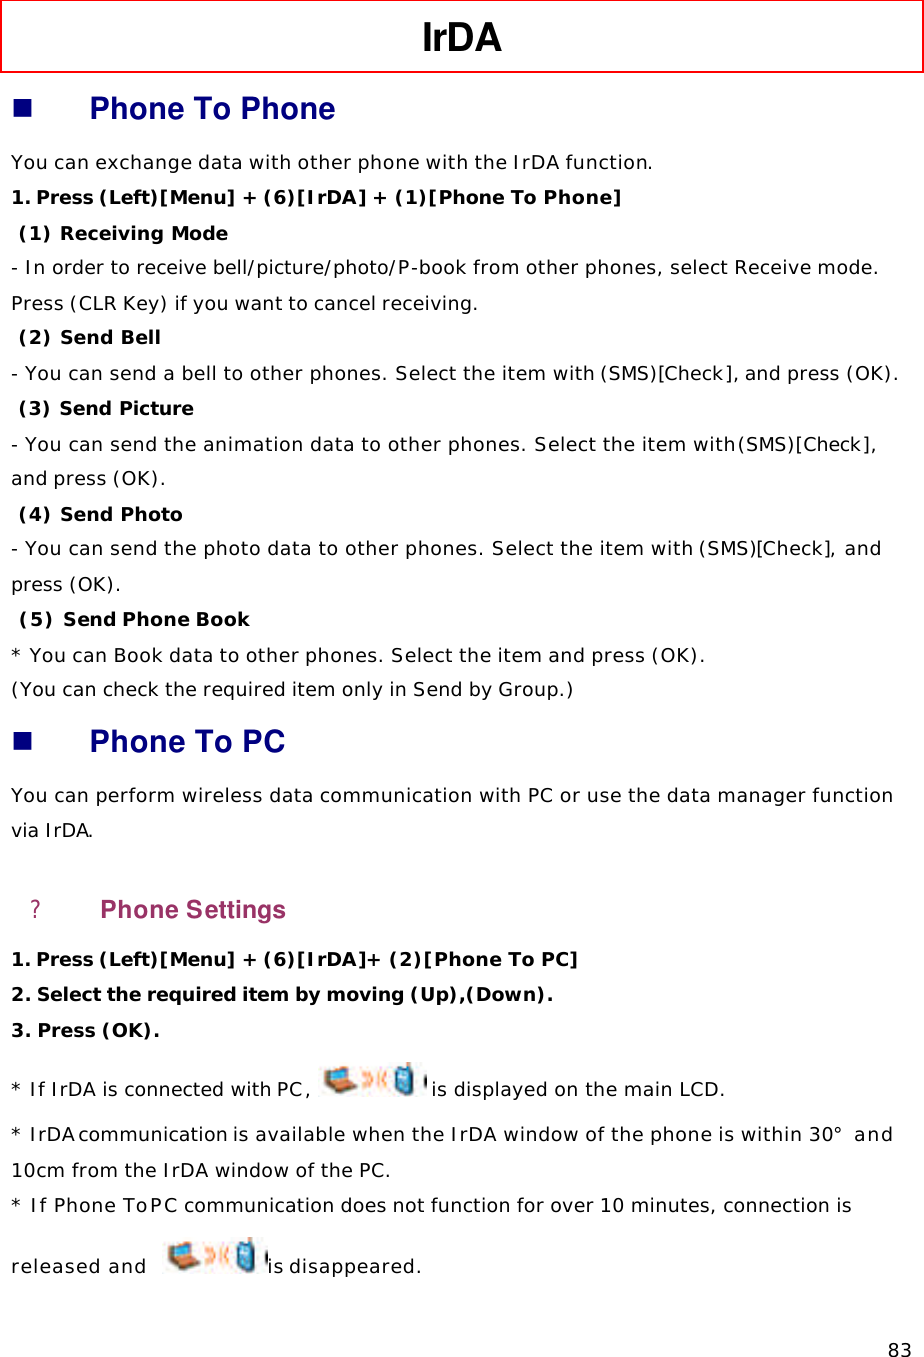   83 IrDA   n Phone To Phone You can exchange data with other phone with the IrDA function. 1. Press (Left)[Menu] + (6)[IrDA] + (1)[Phone To Phone]  (1) Receiving Mode - In order to receive bell/picture/photo/P-book from other phones, select Receive mode. Press (CLR Key) if you want to cancel receiving.  (2) Send Bell - You can send a bell to other phones. Select the item with (SMS)[Check], and press (OK).  (3) Send Picture - You can send the animation data to other phones. Select the item with (SMS)[Check], and press (OK).  (4) Send Photo - You can send the photo data to other phones. Select the item with (SMS)[Check], and press (OK).  (5) Send Phone Book * You can Book data to other phones. Select the item and press (OK).  (You can check the required item only in Send by Group.) n Phone To PC You can perform wireless data communication with PC or use the data manager function via IrDA. ?  Phone Settings 1. Press (Left)[Menu] + (6)[IrDA]+ (2)[Phone To PC] 2. Select the required item by moving (Up),(Down). 3. Press (OK).  * If IrDA is connected with PC,  is displayed on the main LCD. * IrDA communication is available when the IrDA window of the phone is within 30° and 10cm from the IrDA window of the PC. * If Phone To PC communication does not function for over 10 minutes, connection is released and   is disappeared. 